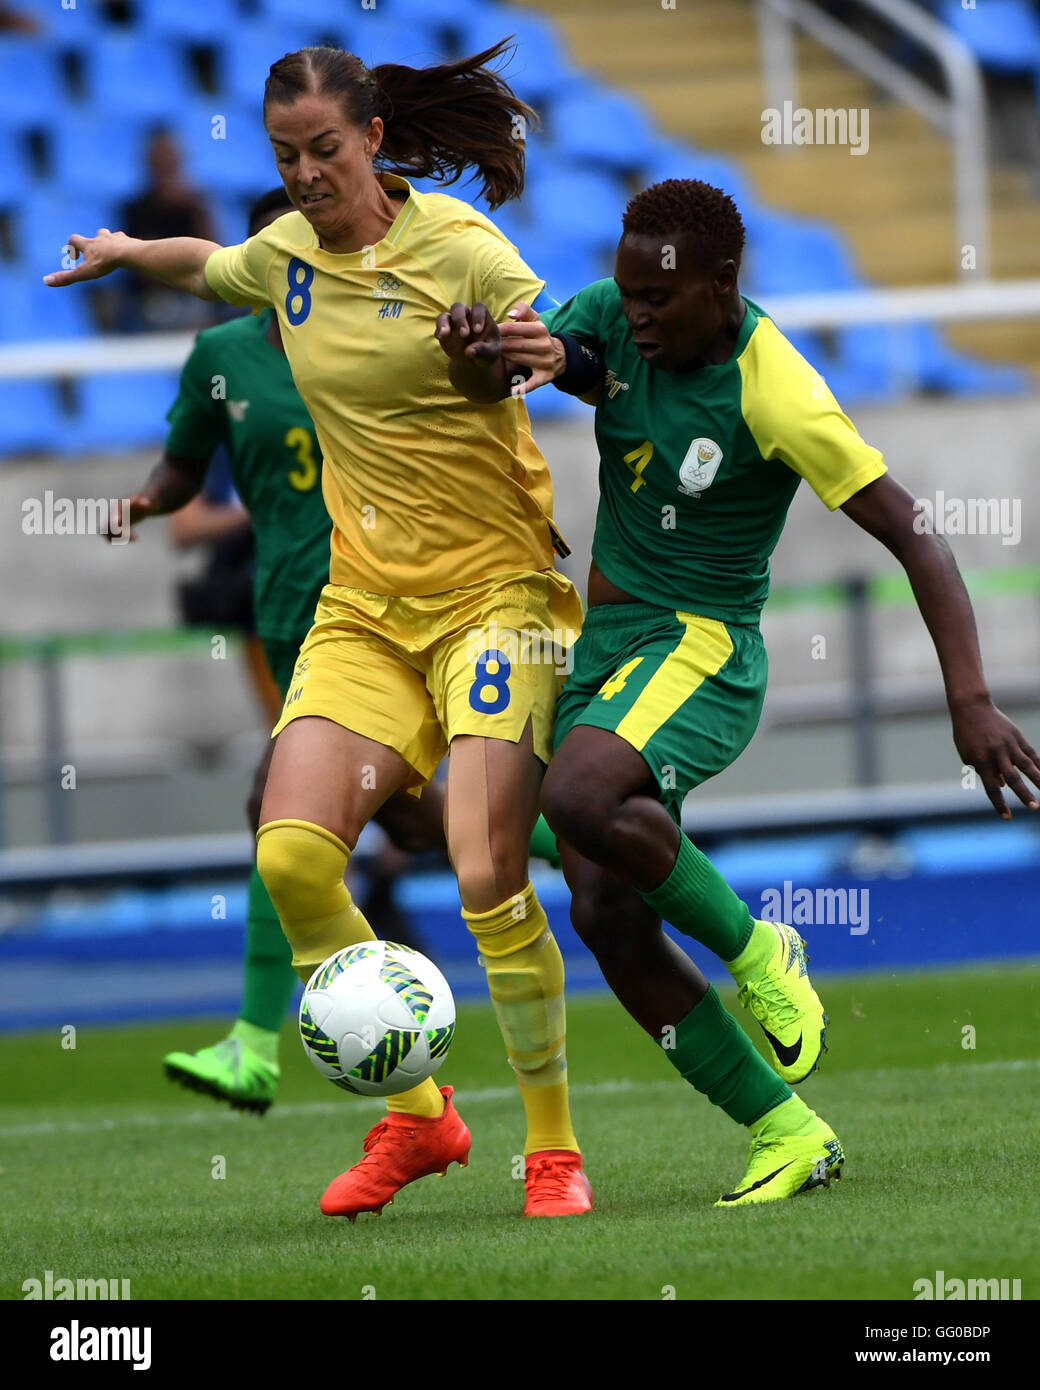 Rio De Janeiro, Brazil. 3rd Aug, 2016. Lotta Schelin (L) of Sweden competes during the opening match of the women's Olympic football competitions against South Africa at the Olympic Stadium in Rio de Janeiro, Brazil, Aug. 3, 2016. Sweden won 1-0. © Yan Yan/Xinhua/Alamy Live News Stock Photo